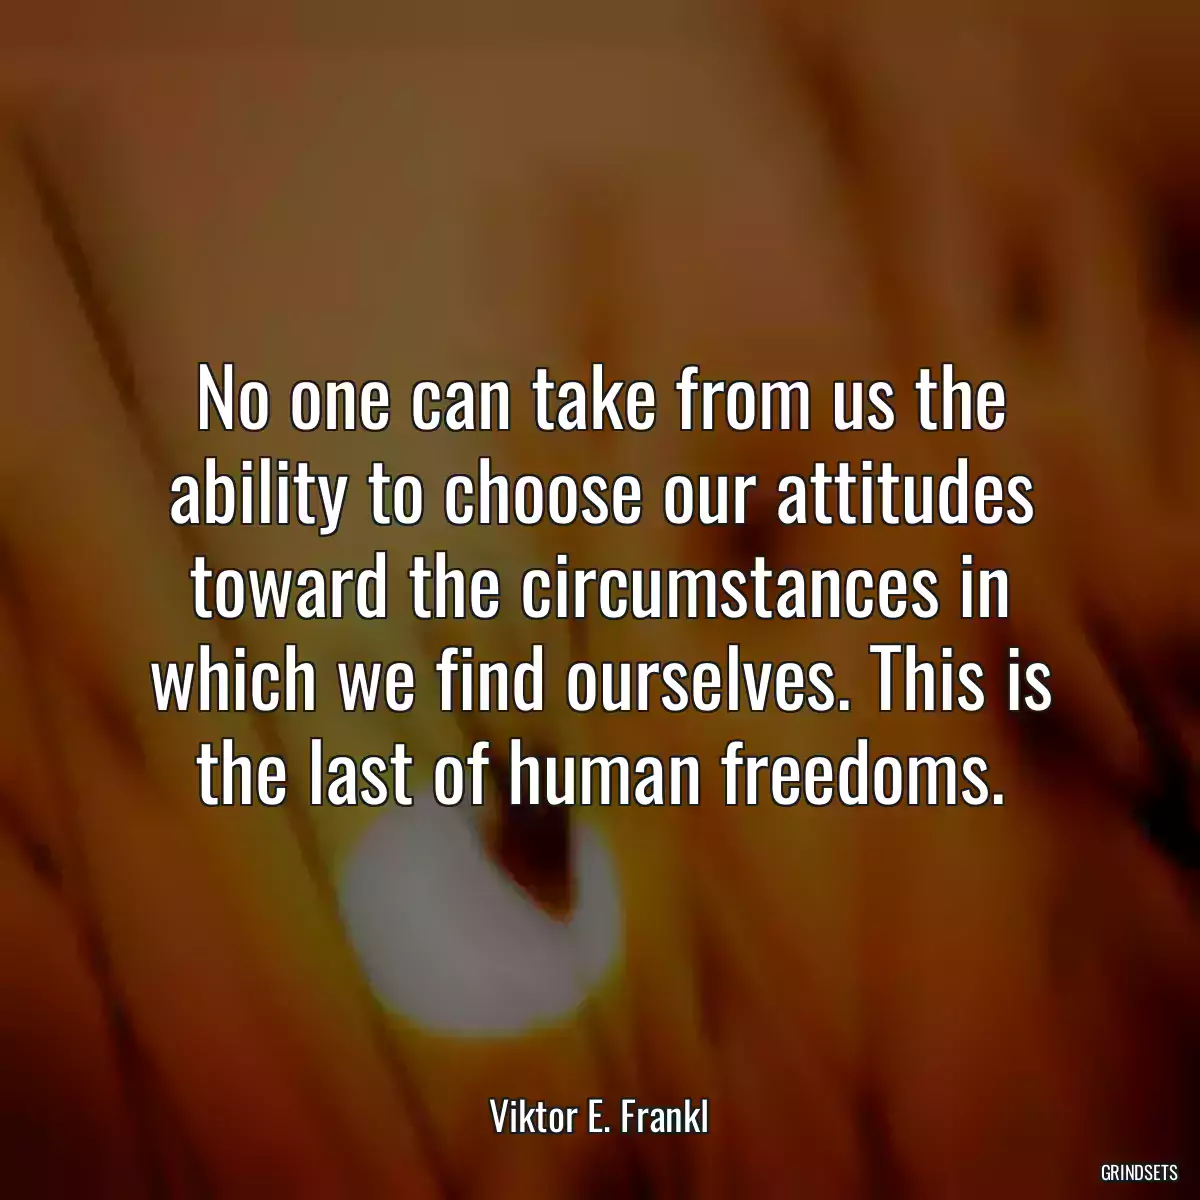 No one can take from us the ability to choose our attitudes toward the circumstances in which we find ourselves. This is the last of human freedoms.